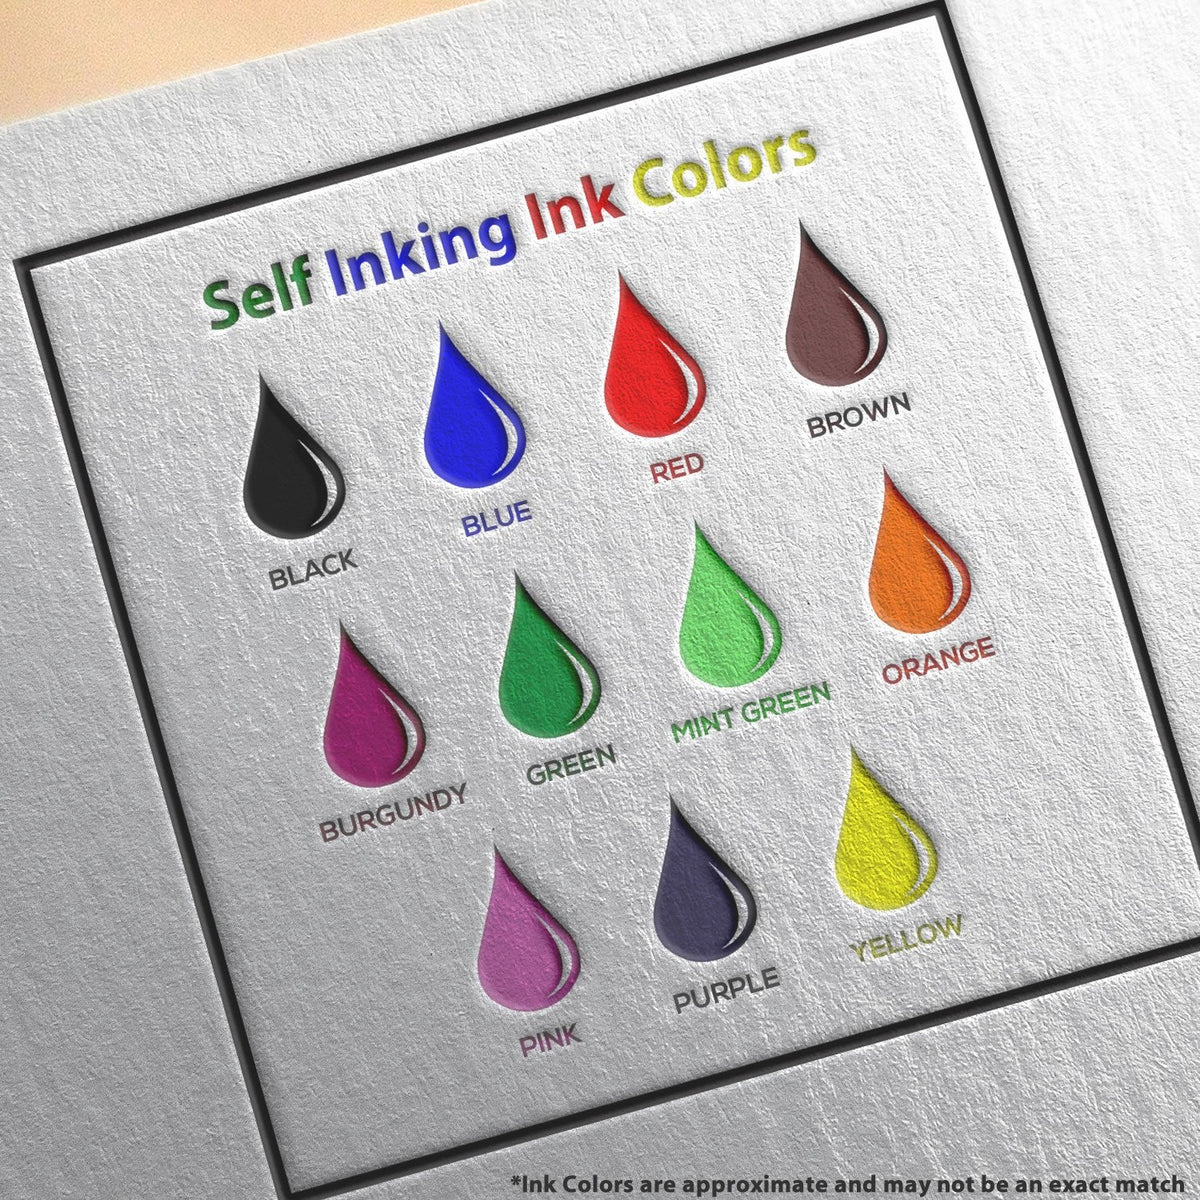 Self-Inking Original with Hand Stamp Ink Color Options